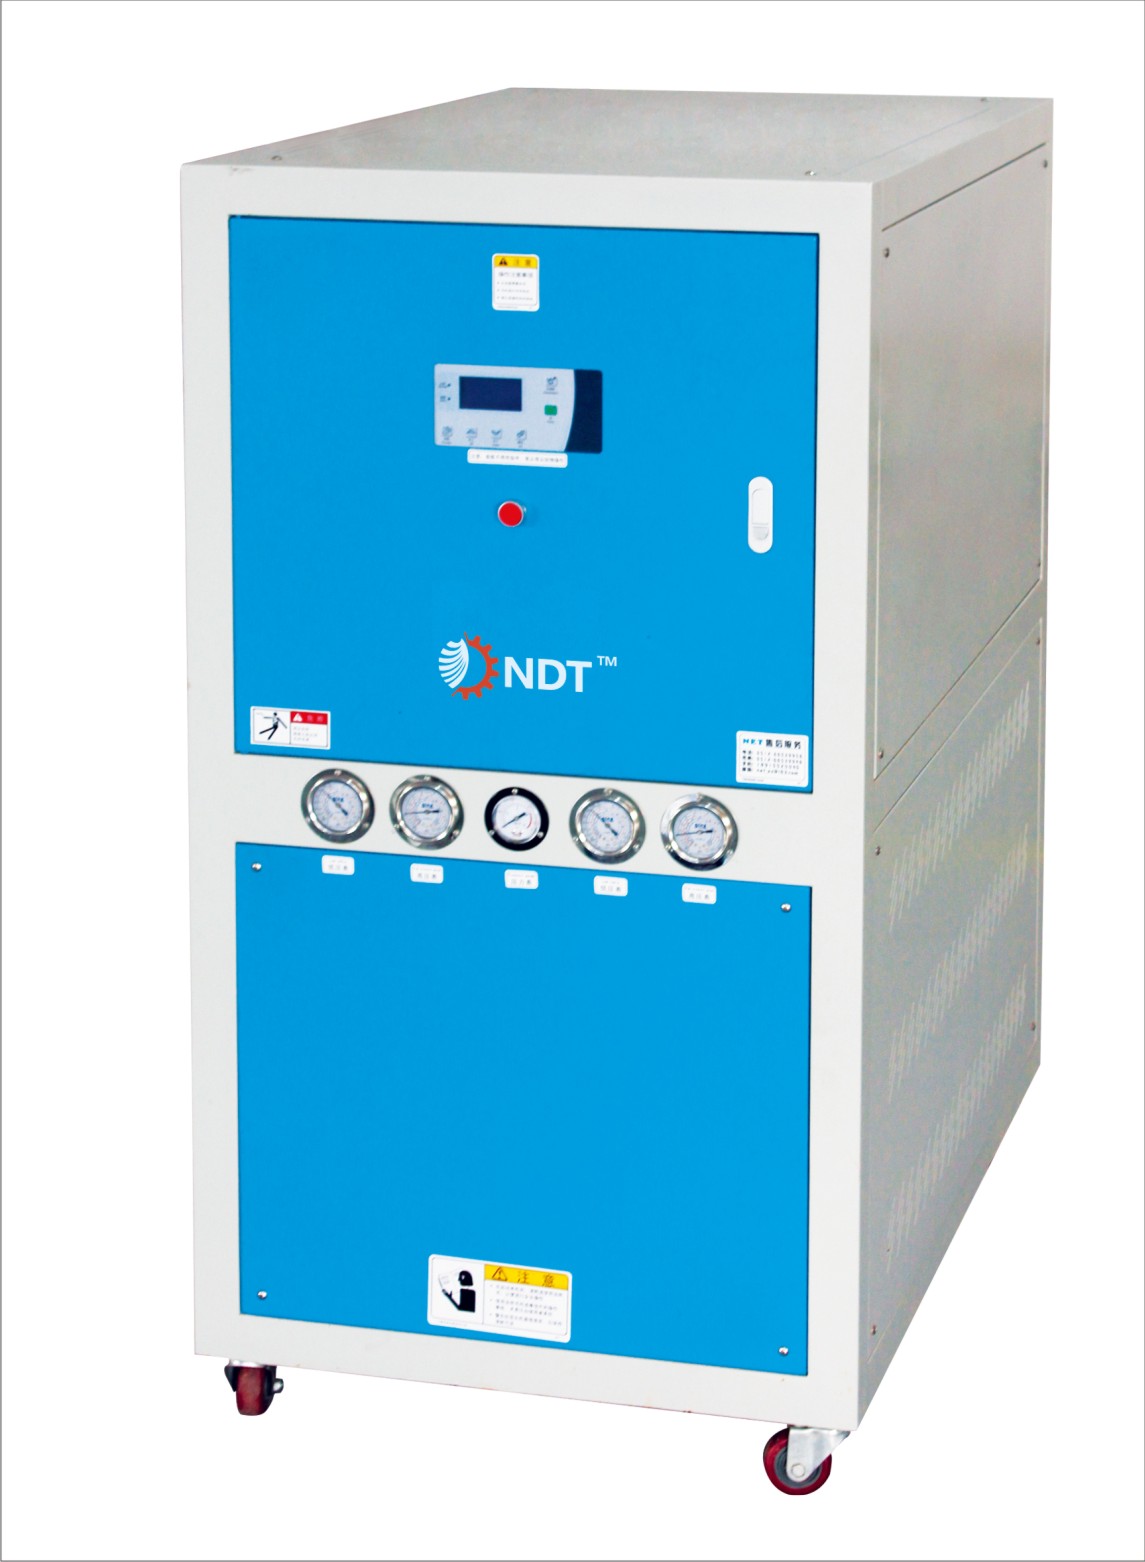 WHY CHOOSE NDETATED CHILLER?